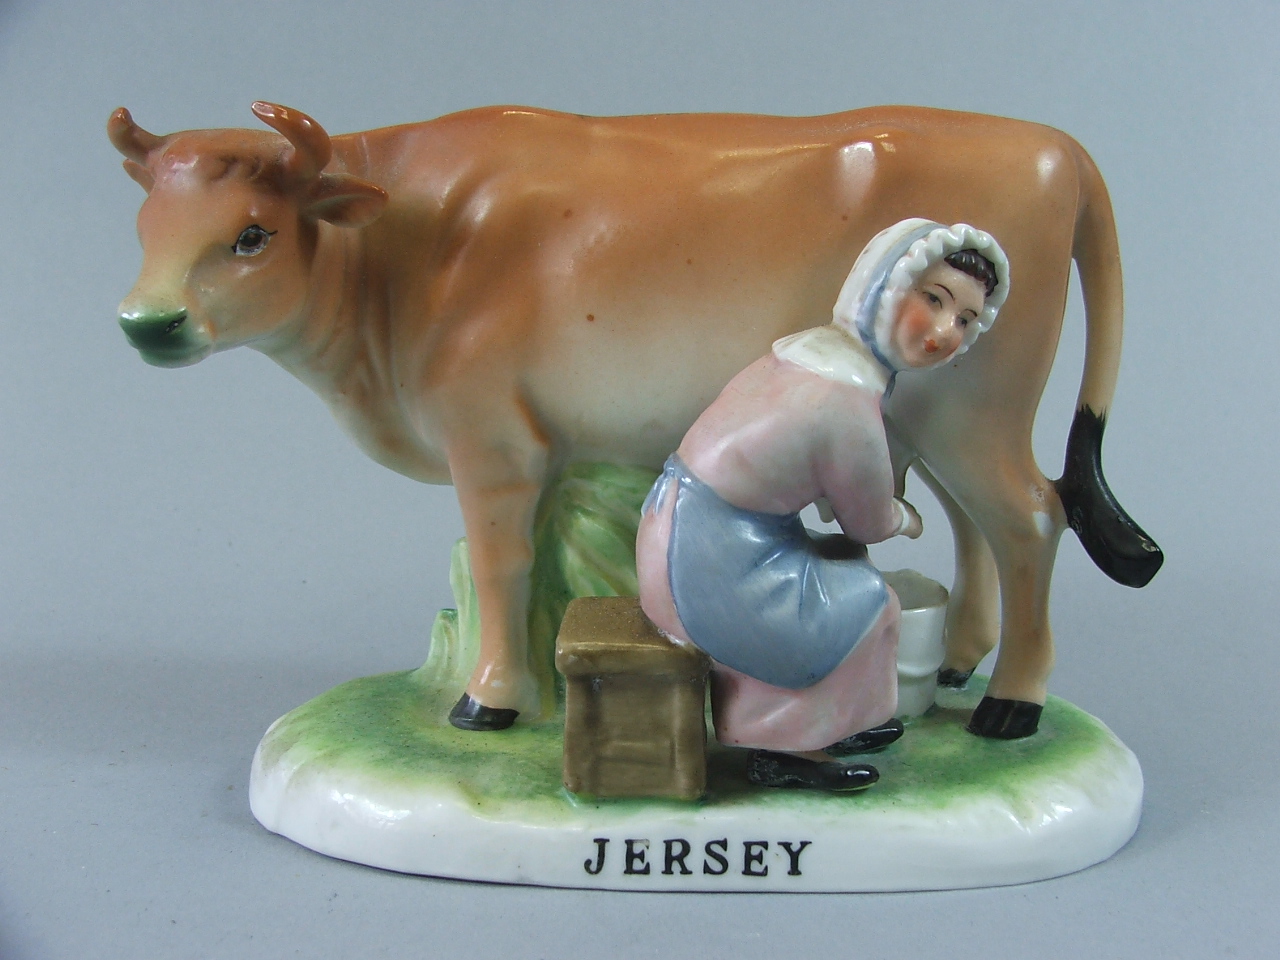 A Continental Souvenir Figure Group, Cow and Milkmaid, Jersey, 11 cm High.